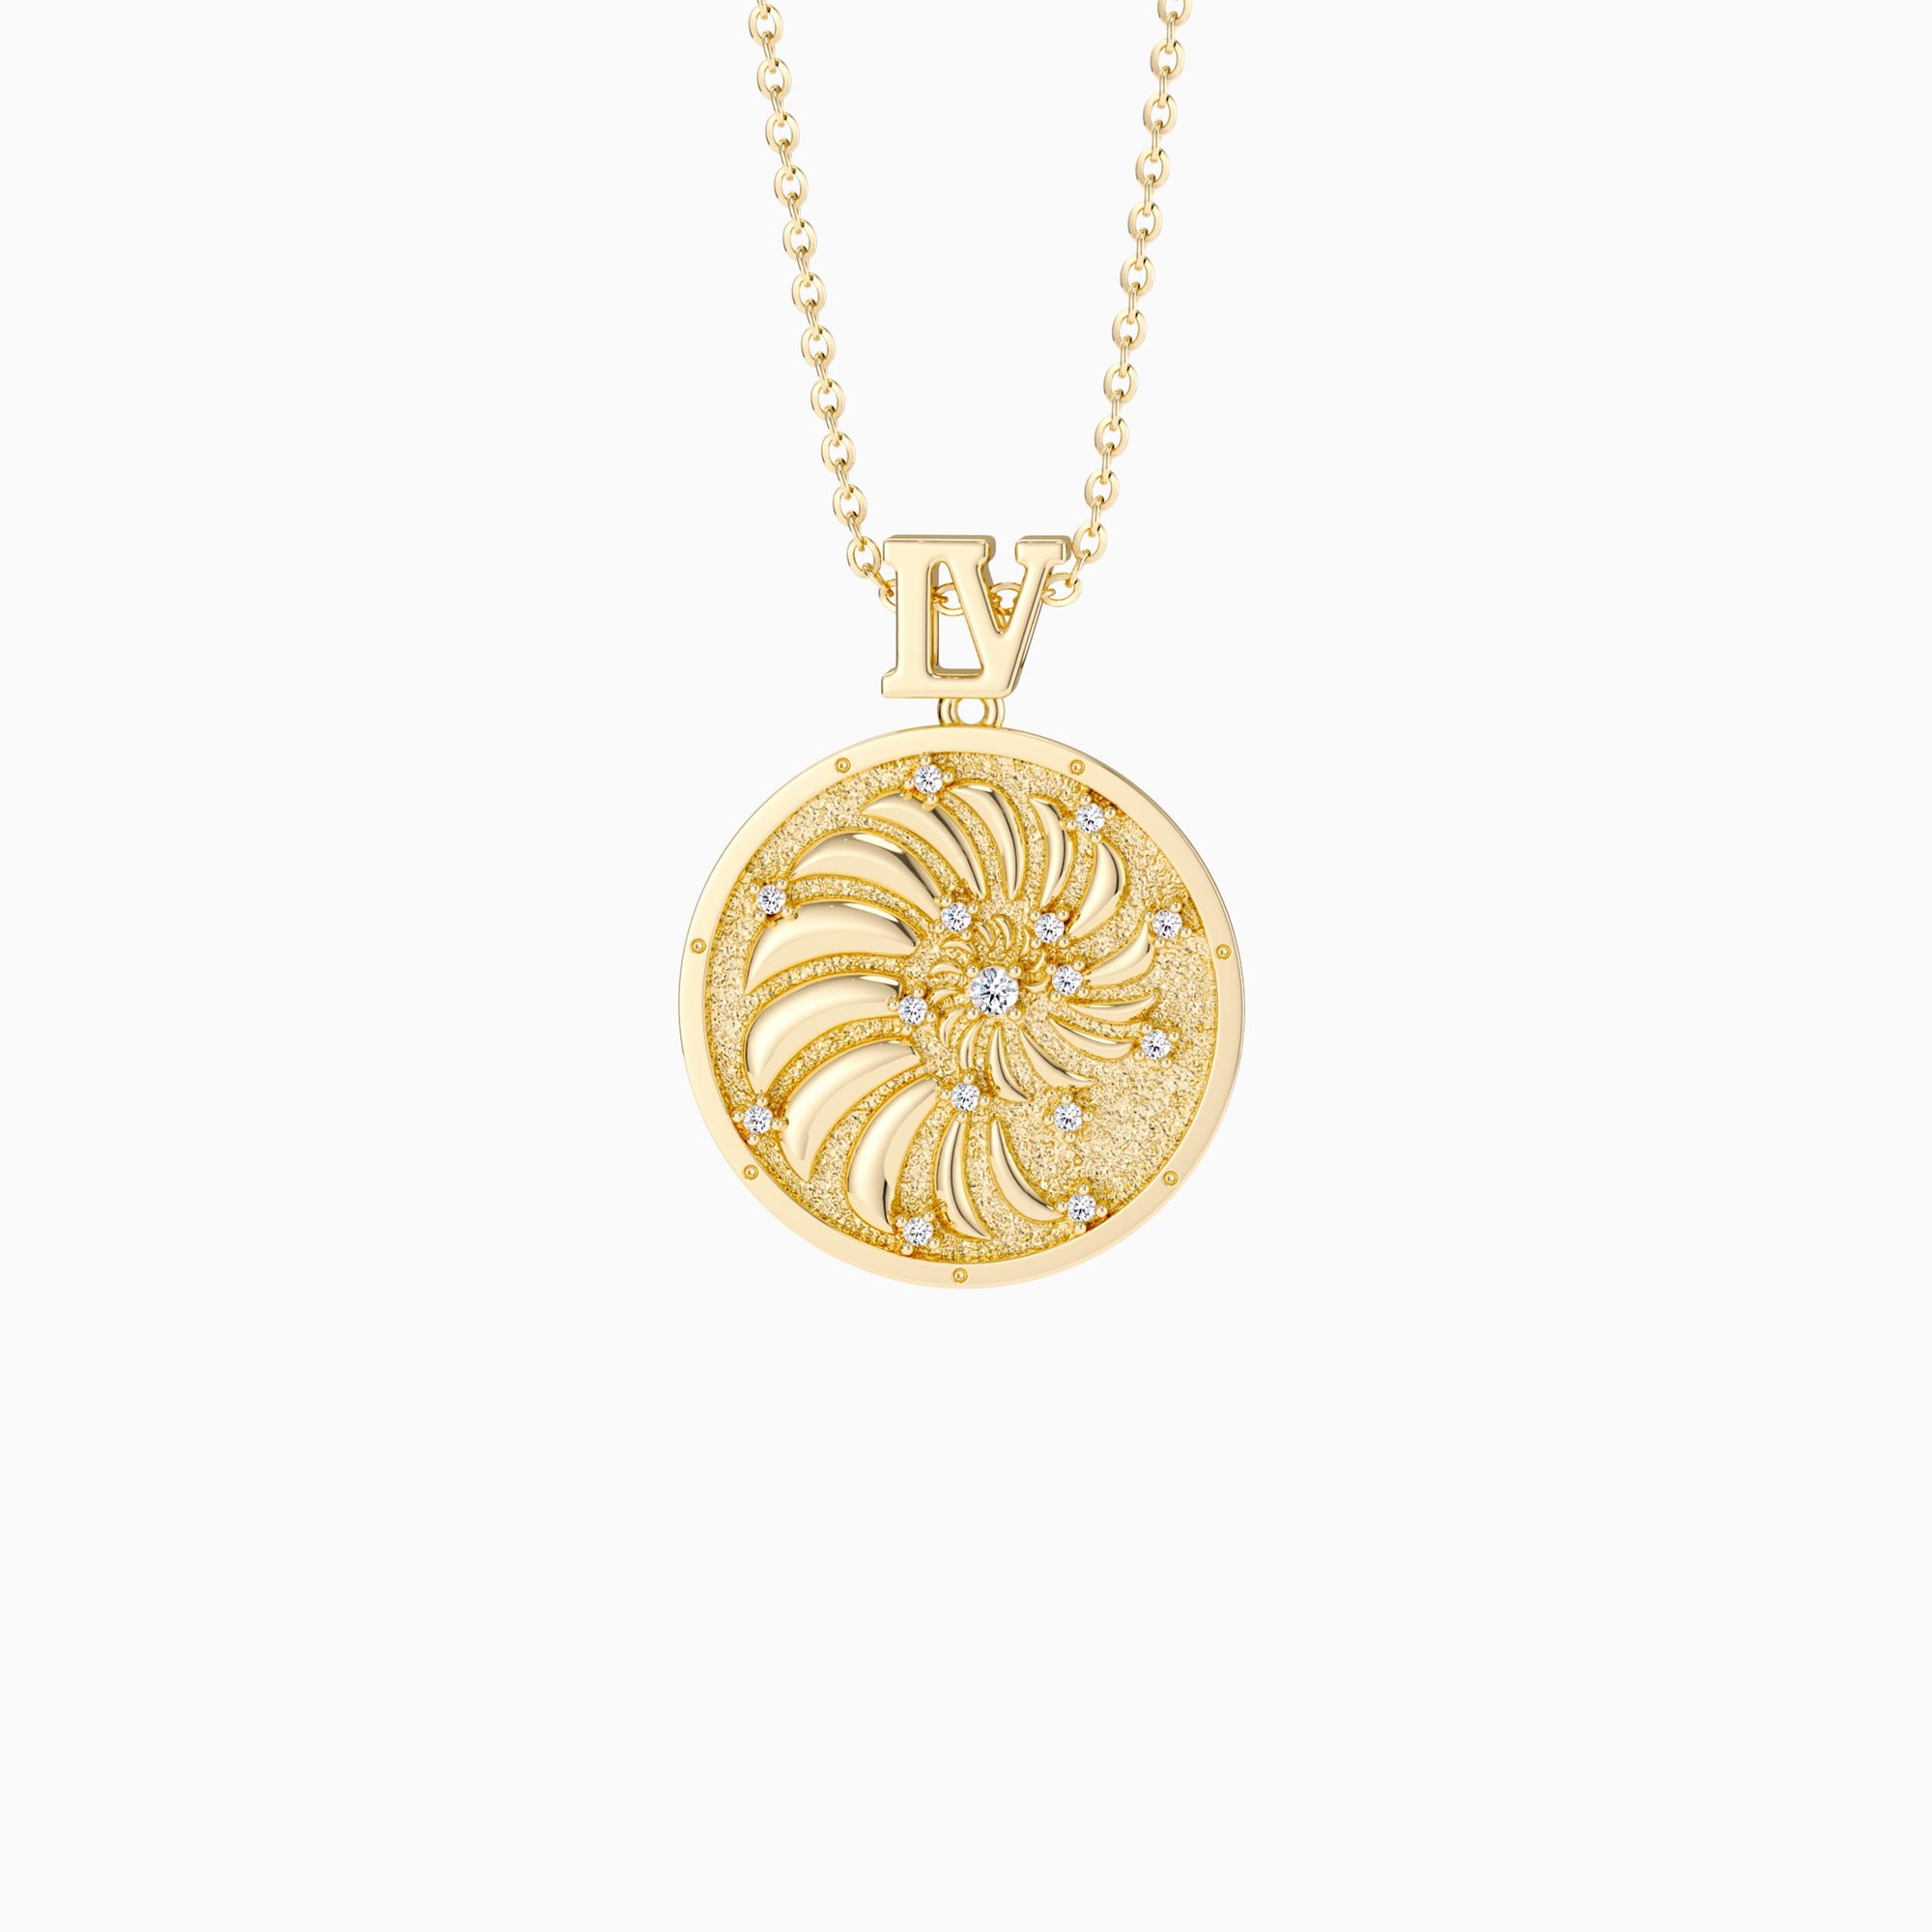 Promised Land Everyday Miracles Blessings Spiral Coin Medallion Necklace - vanimy